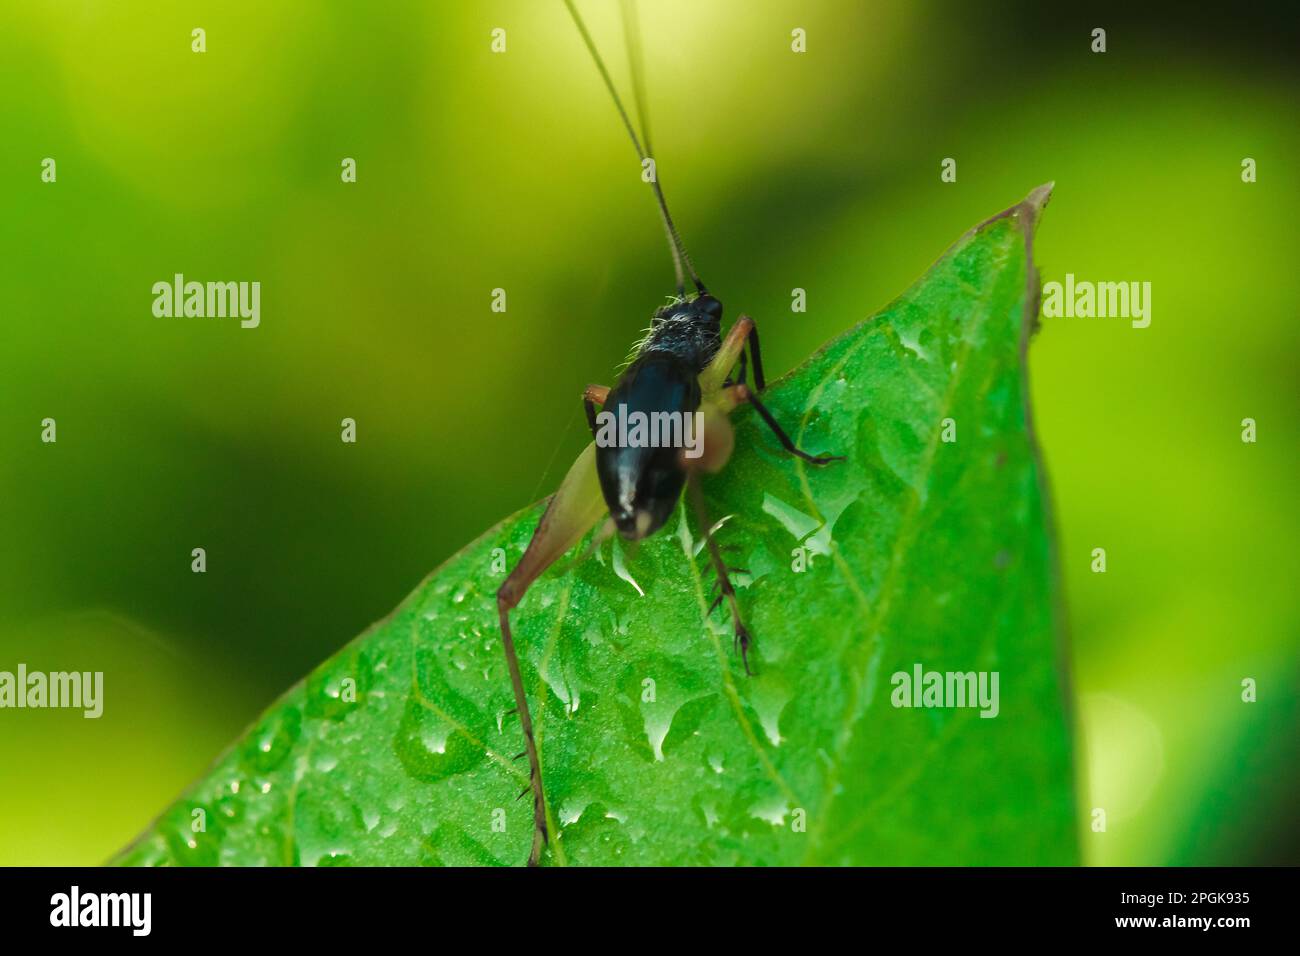 Metioche vittaticolis is on a leaf, about 6 mm in length. Metioche vittaticolis has been found in rice fields since the beginning of the growing seaso Stock Photo